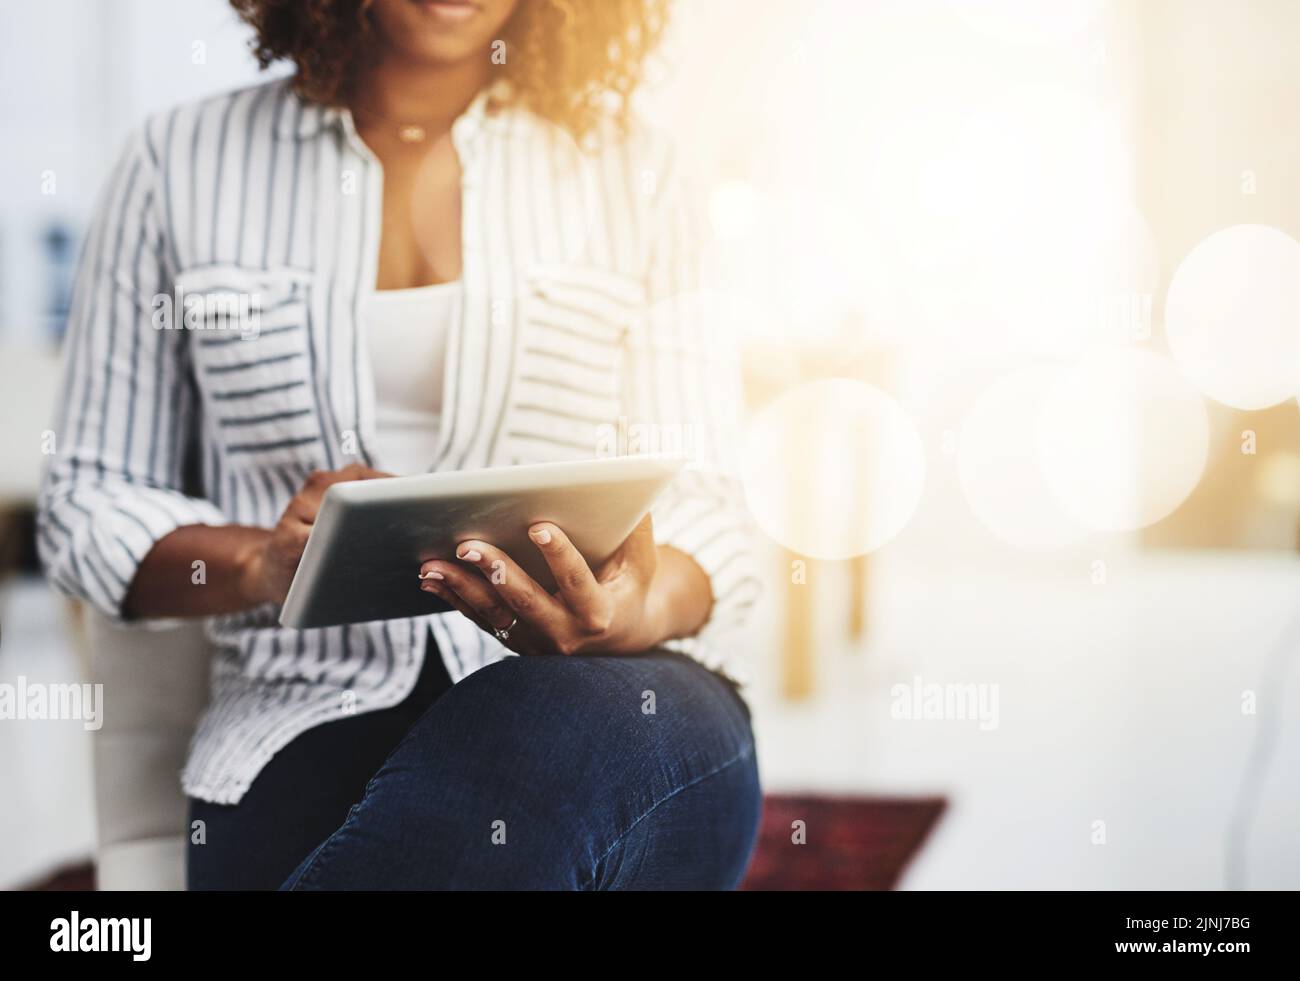 Business woman typing on a tablet, replying to emails and checking notifications while sitting in office at work. Manager, professional worker and Stock Photo